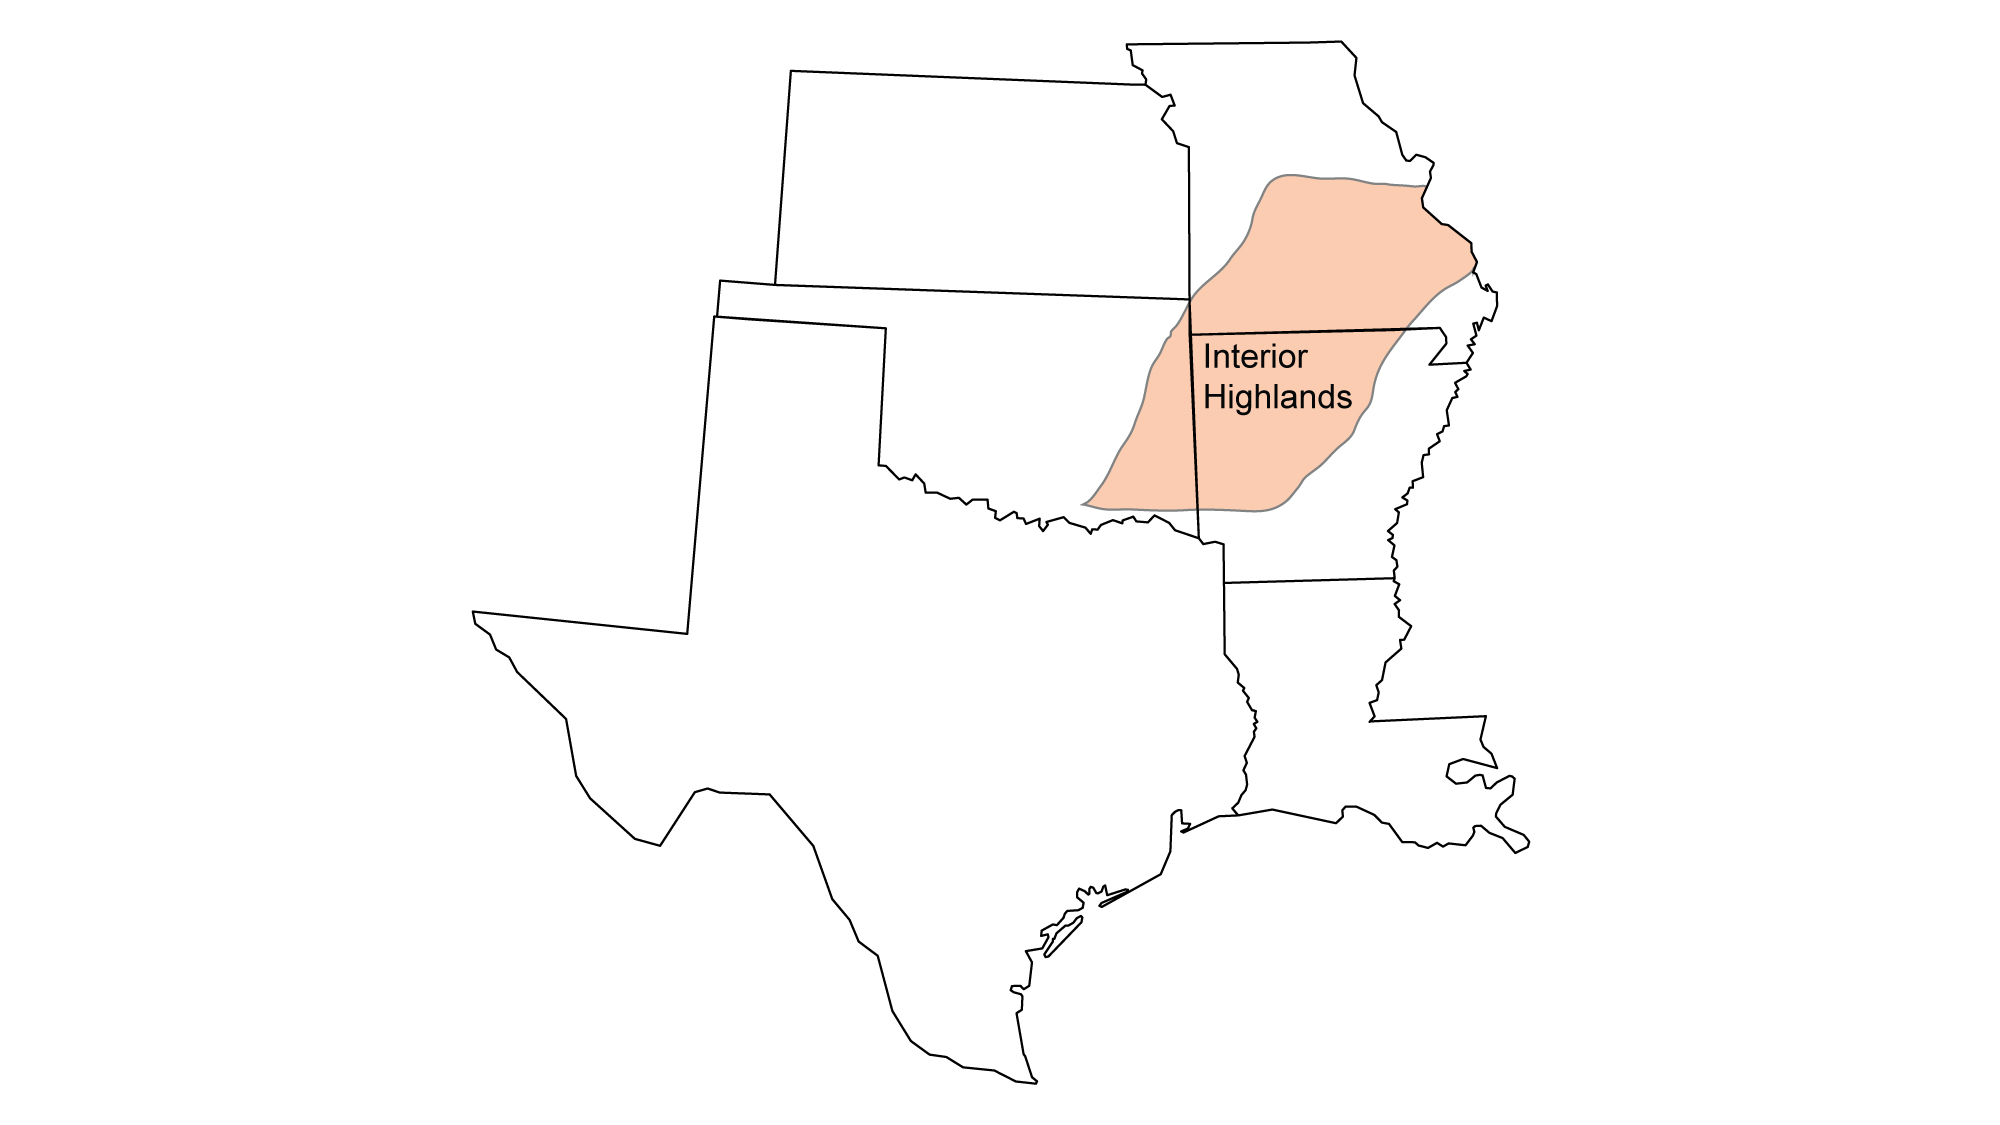 Simple map showing the Interior Highlands region of the South Central United States, including portions of Arkansas, Missouri, and Oklahoma.